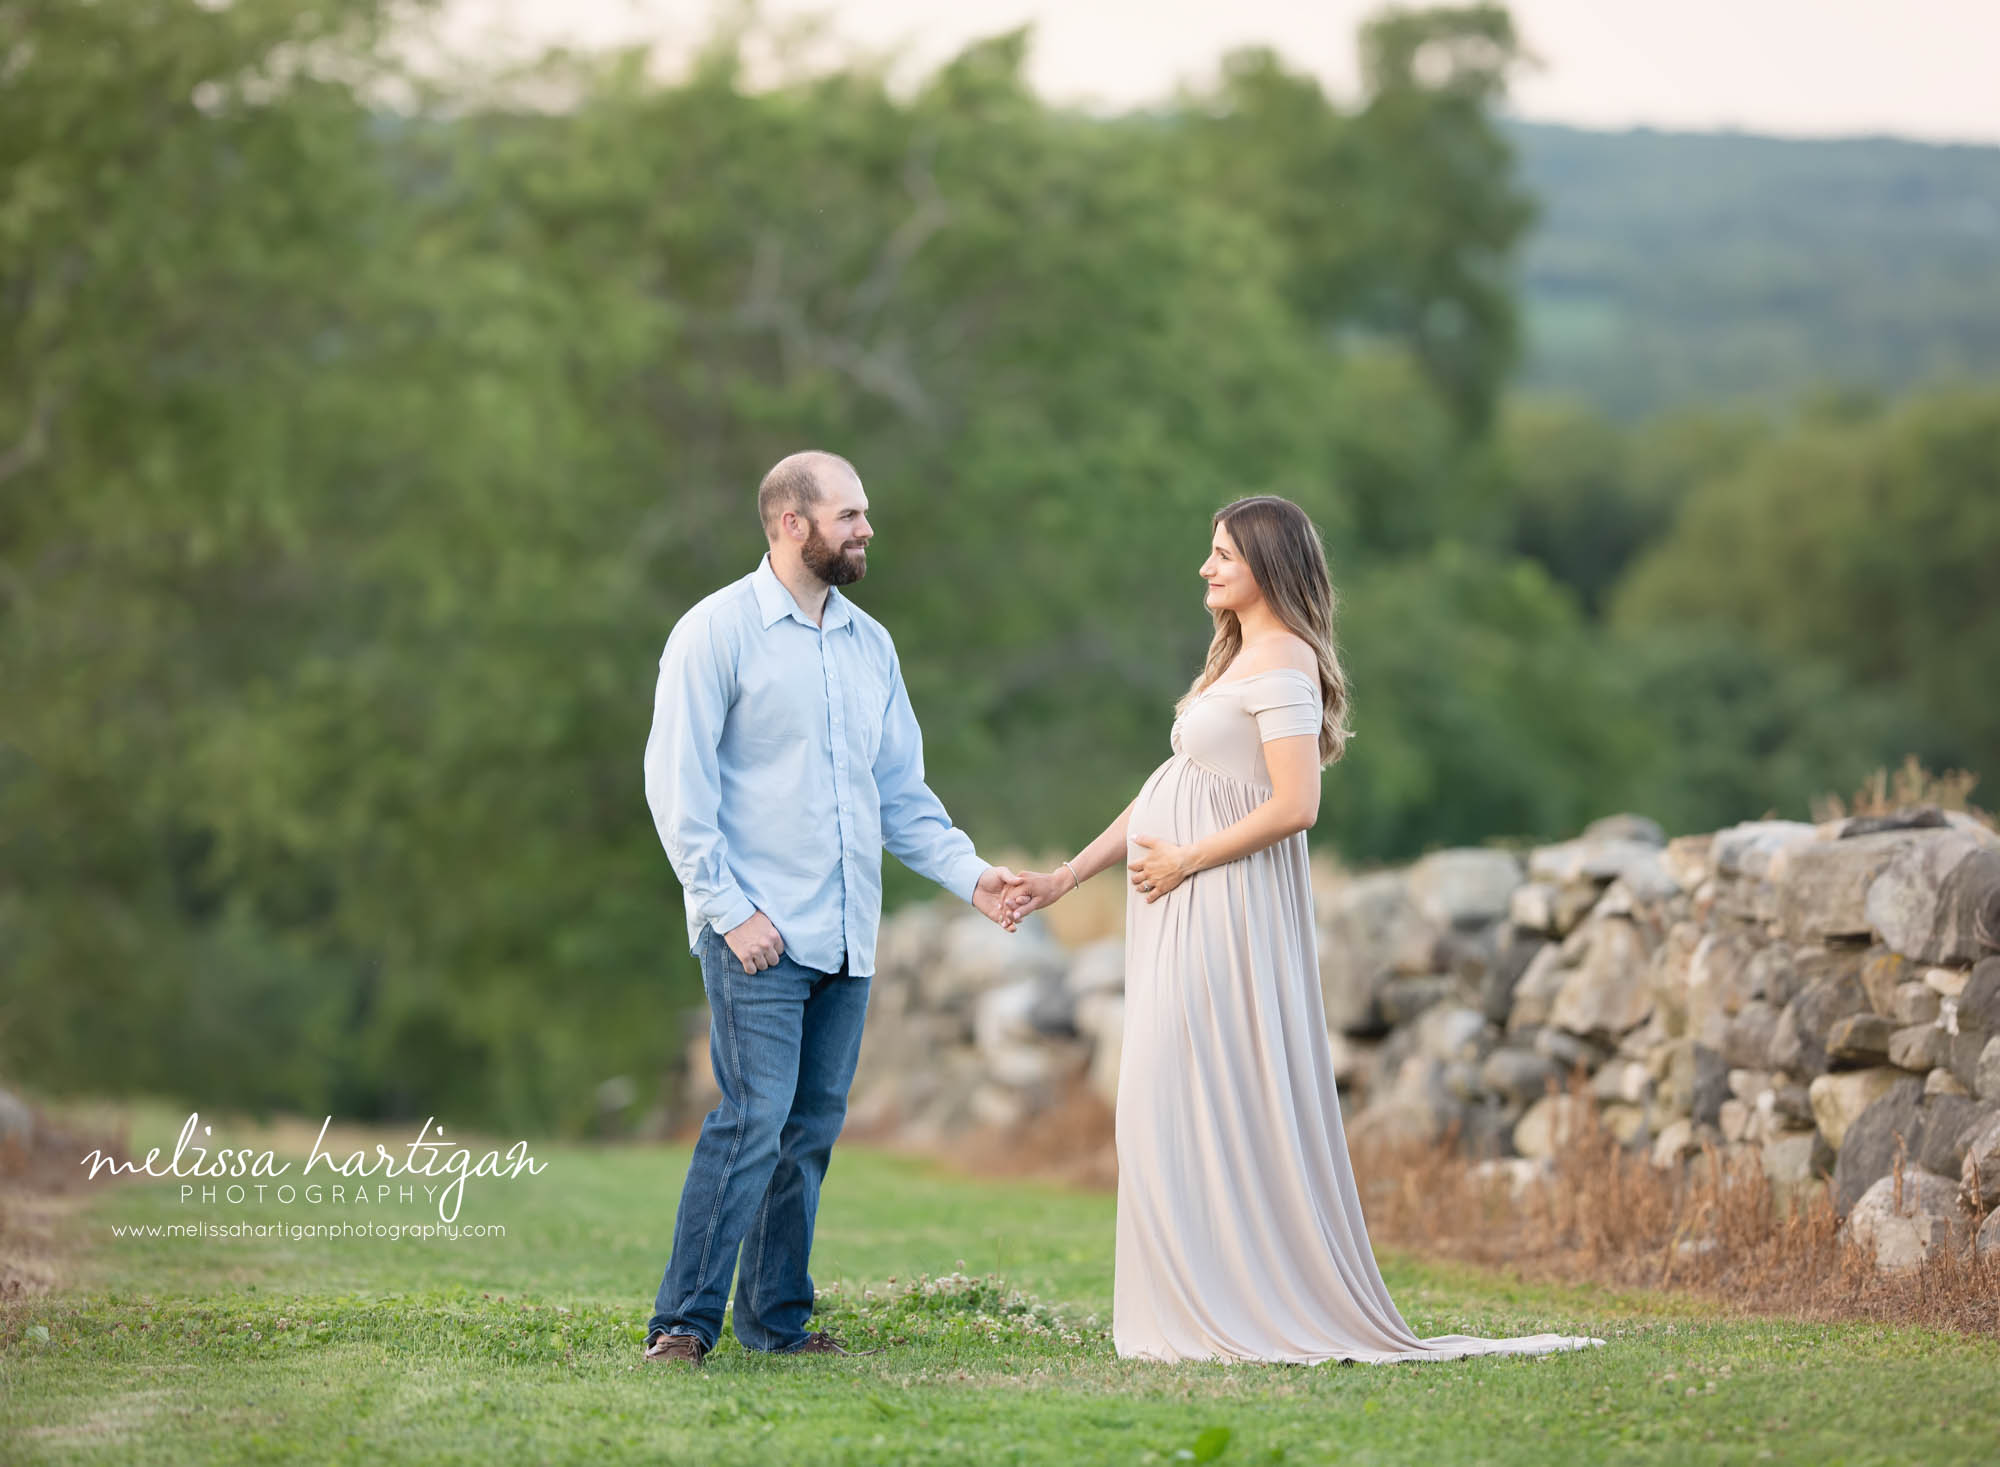 expecti ng couple holding hands looking at each other mom-to-be holding baby bump